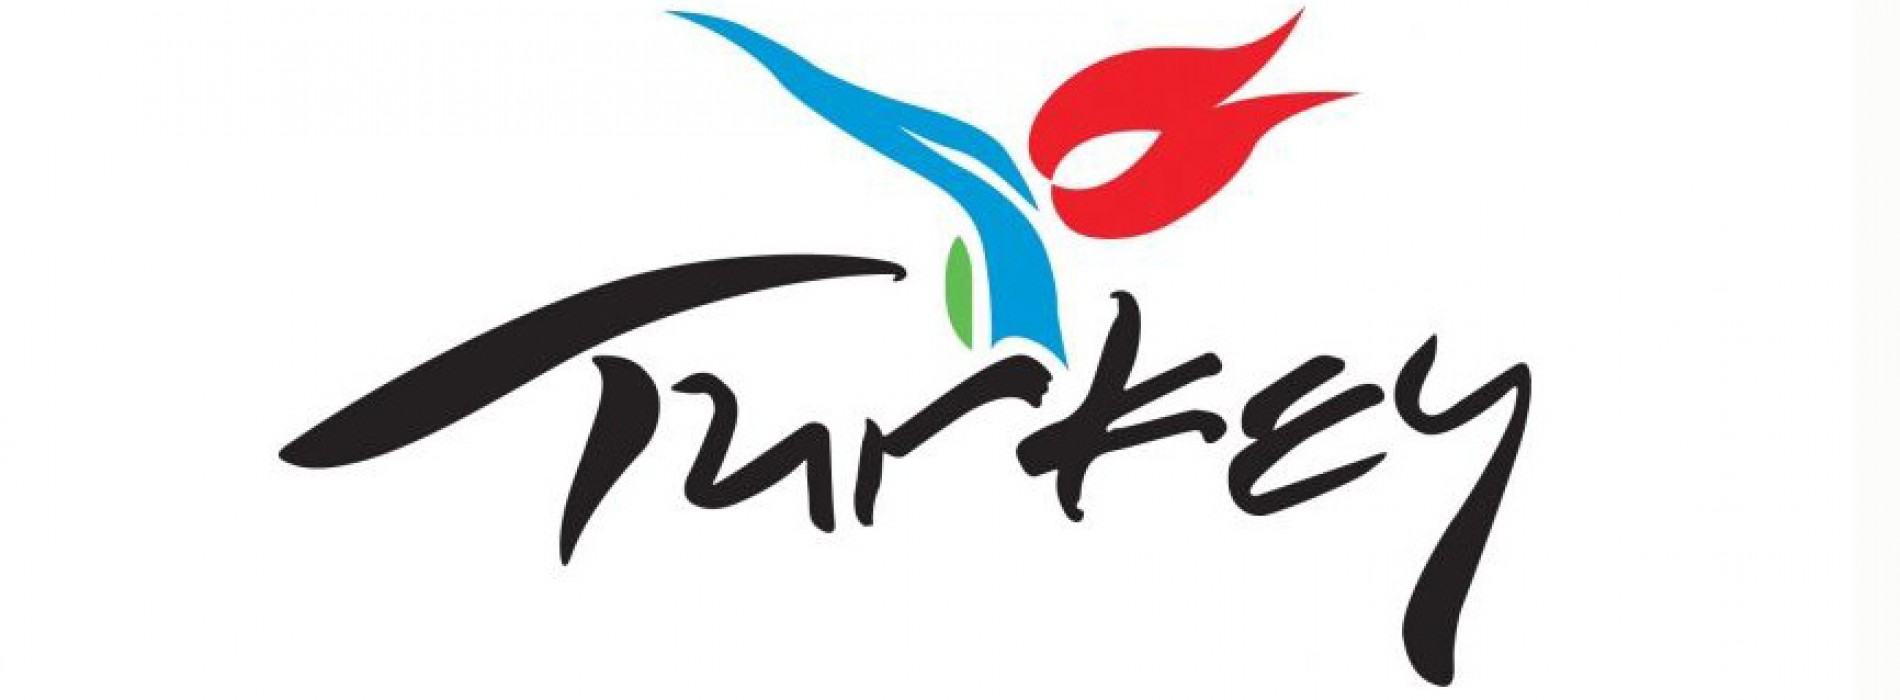 Indian outbound travel to Turkey sees an upward trend